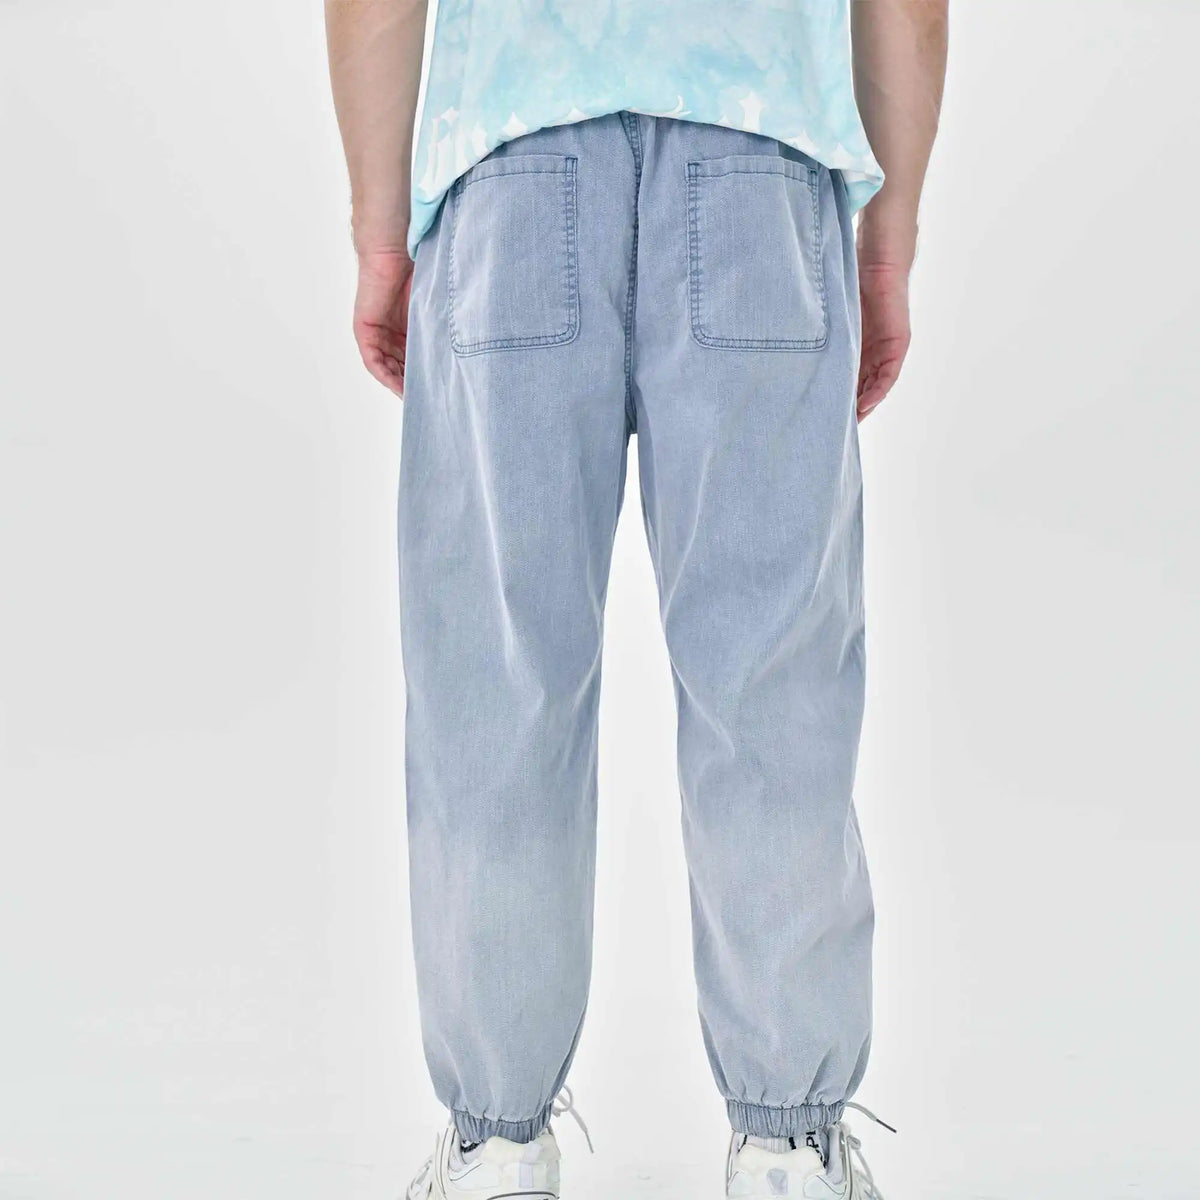 Ankle-Tied Casual Pants For Men